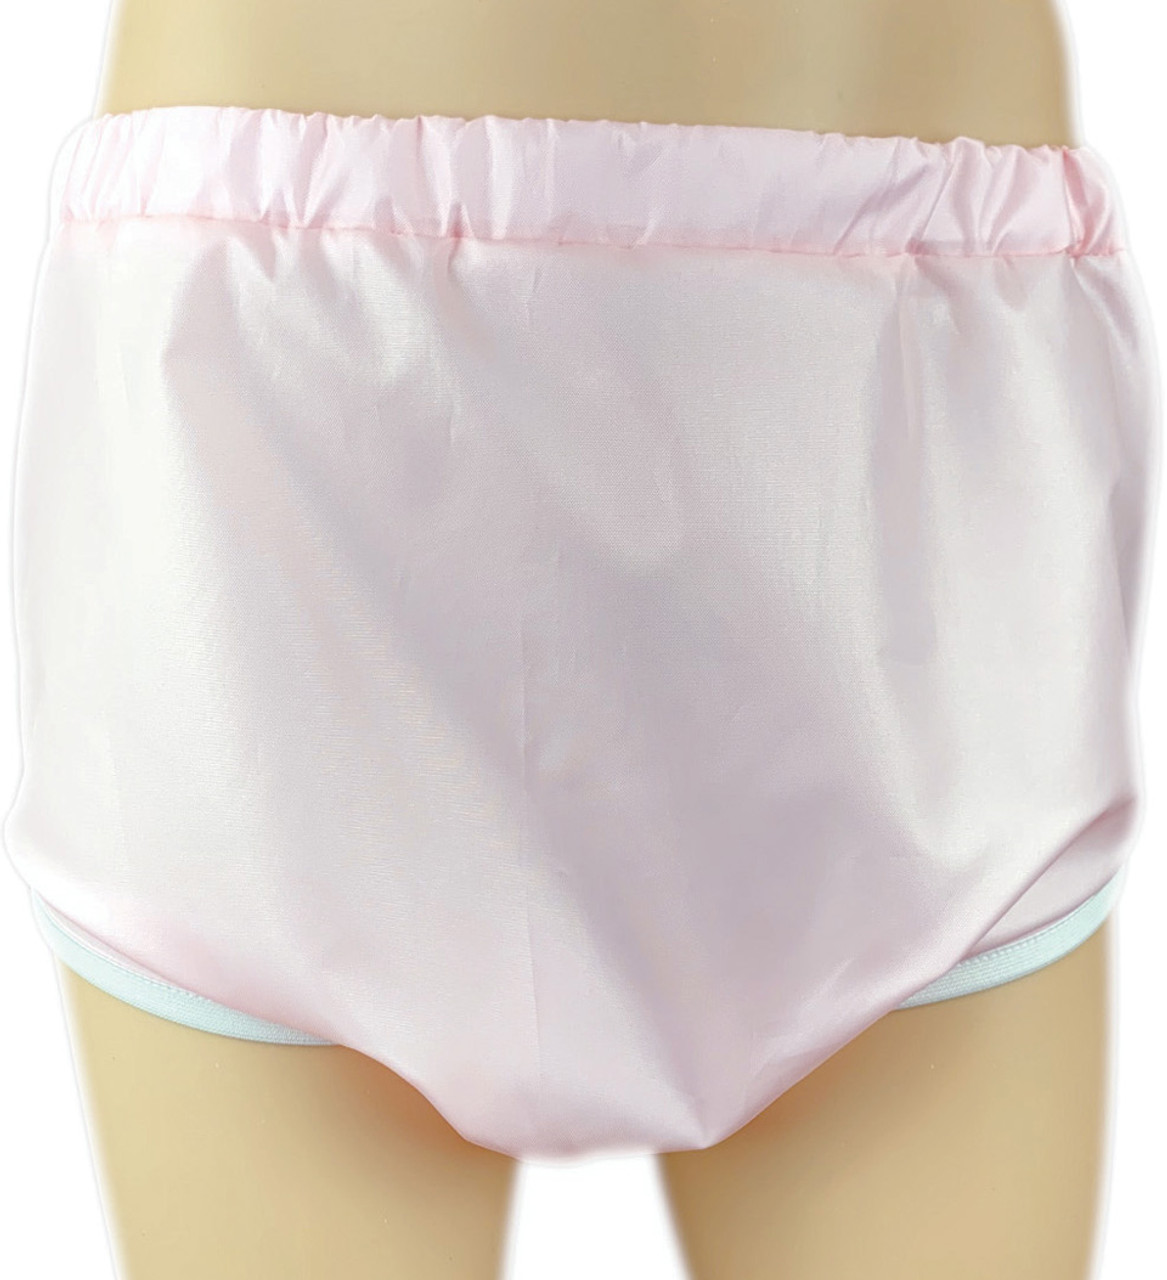 Cuddlz Pink Adult Crinkle Bum Pull Up Pants ABDL Incontinence Briefs